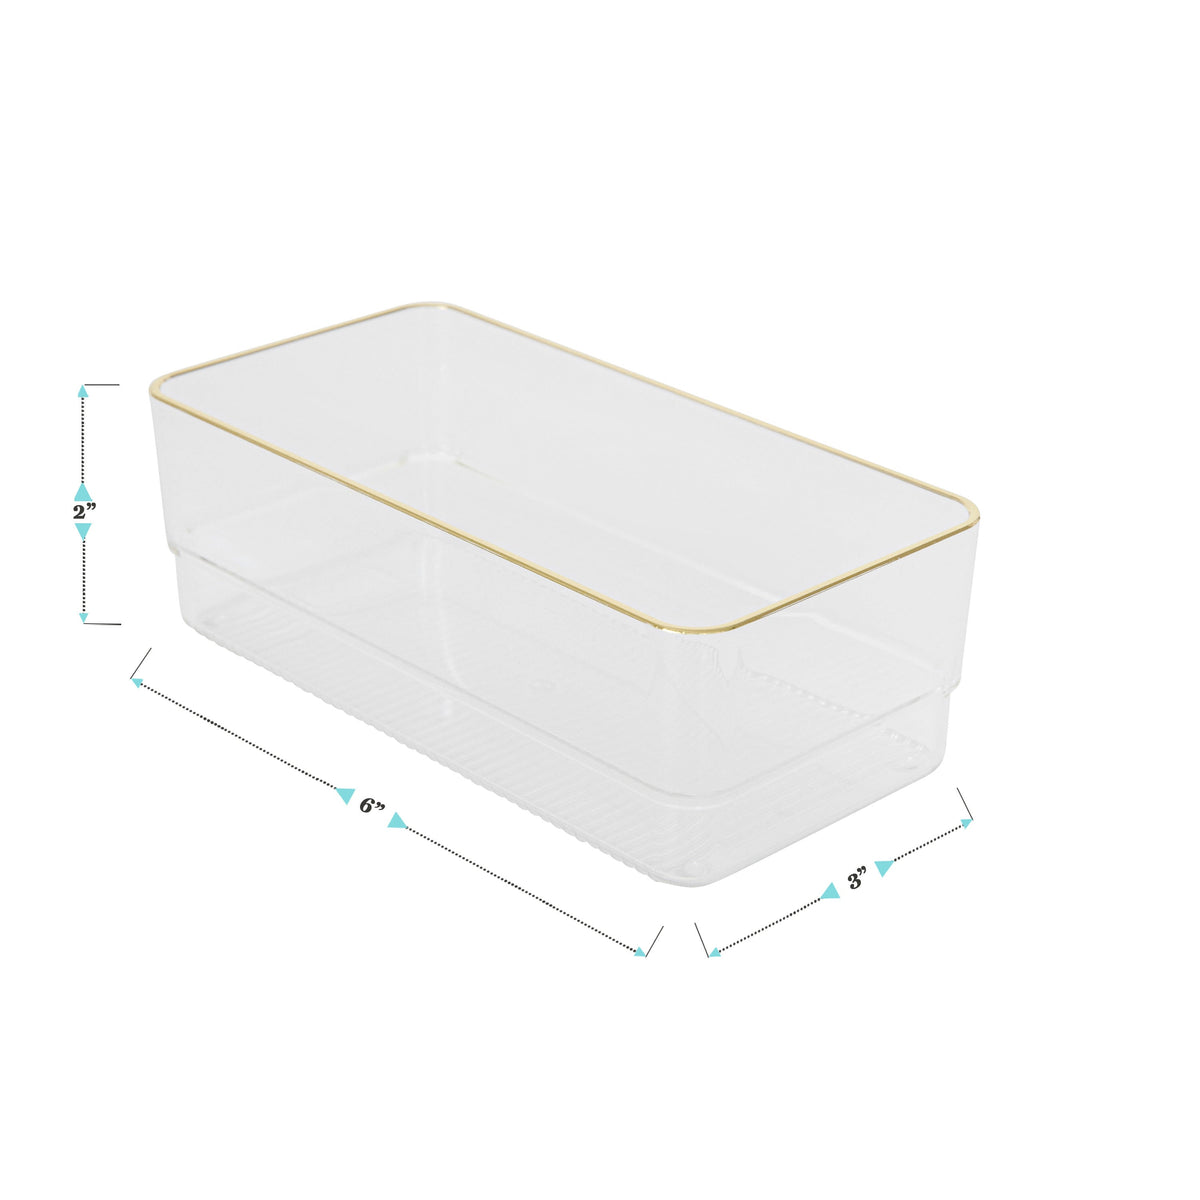 Set of 6 Plastic Stacking Desk Drawer Organizers with Gold Trim - 6 x 3